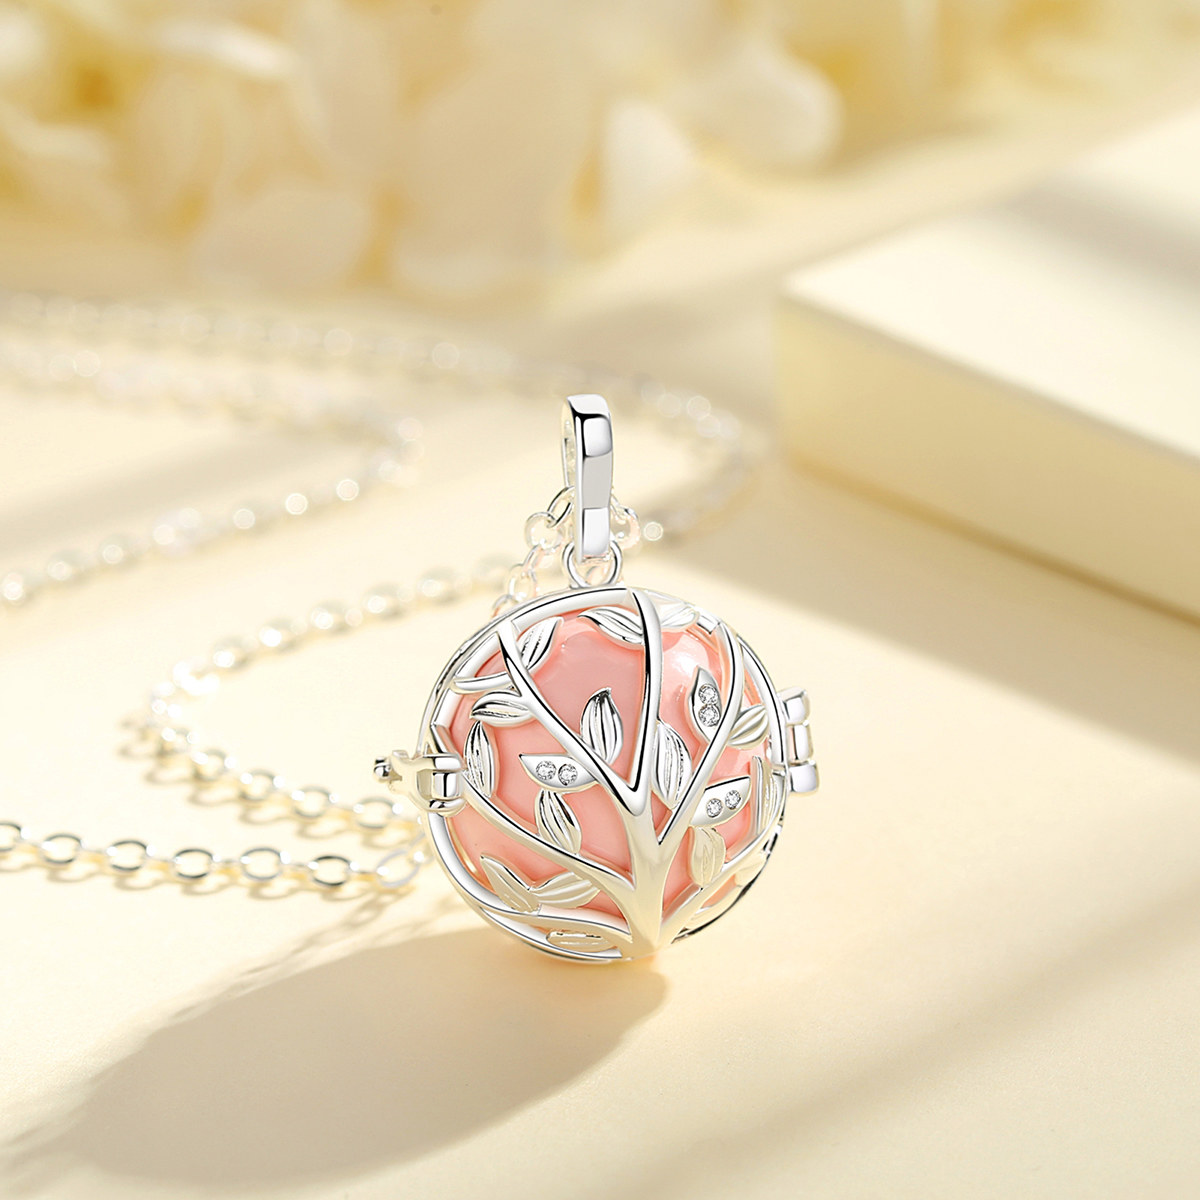 Eudora 20mm fashion Crystal Tree Cage Harmony Ball Chime Bell Pendant Angel Caller Bola Necklace for Baby Pregnancy Jewelry K168 2